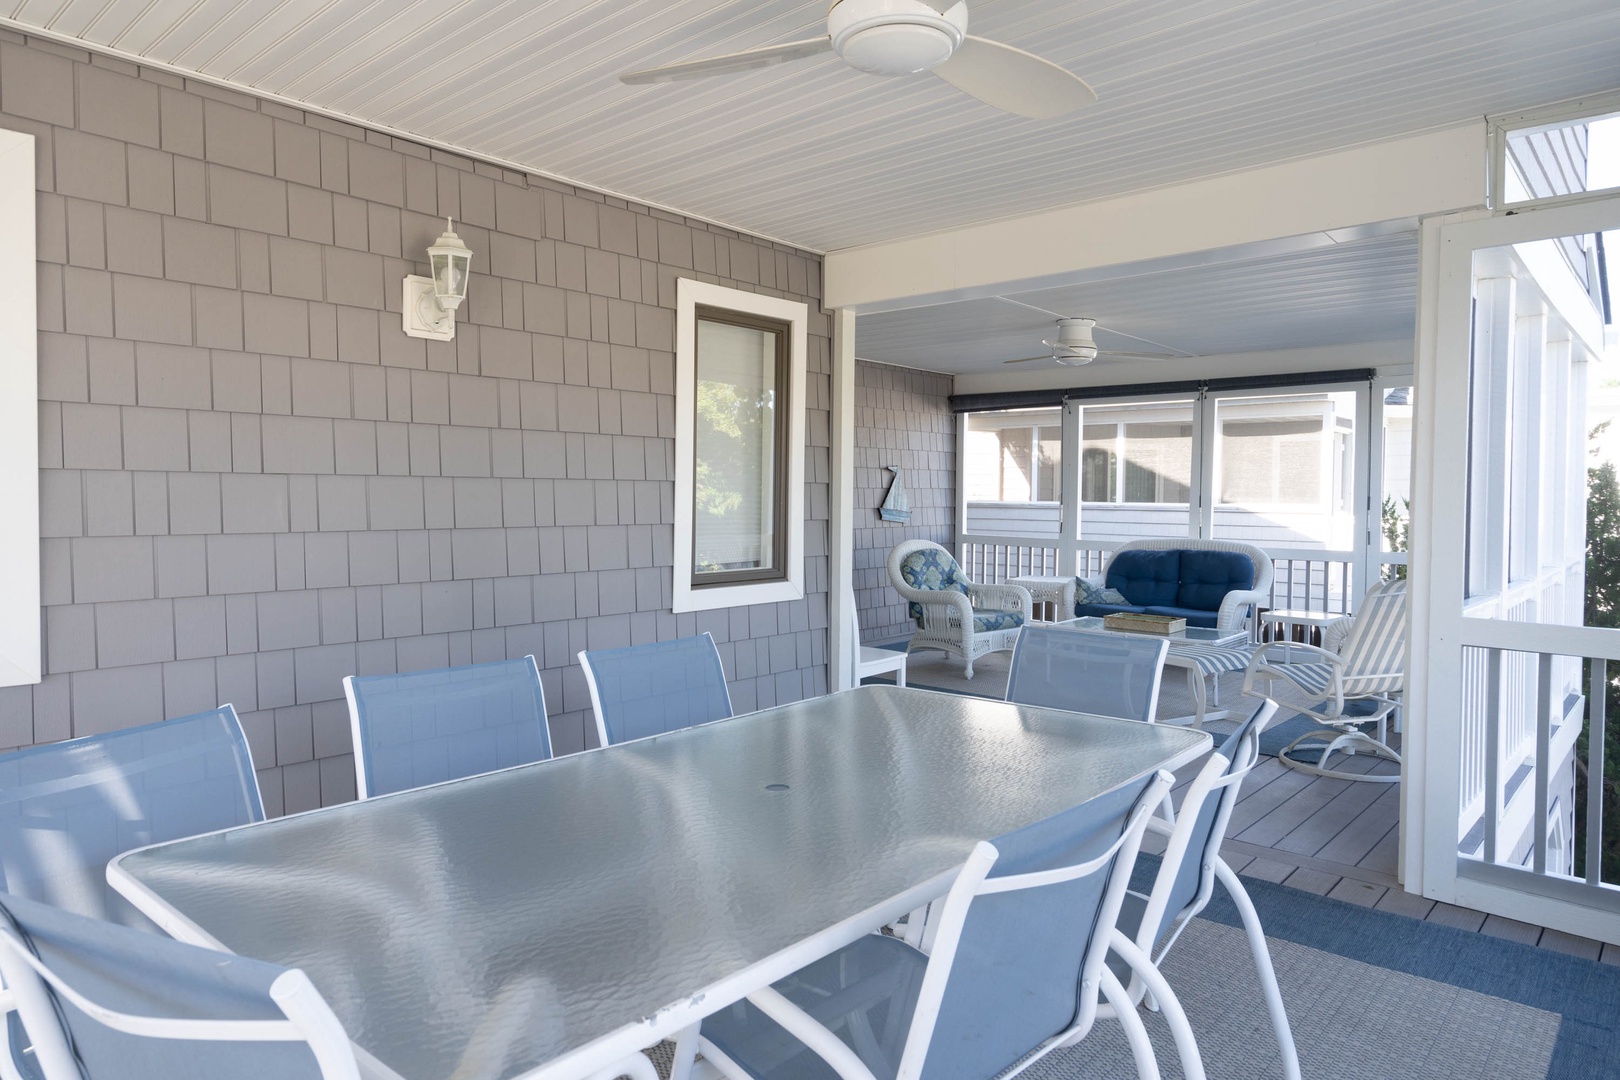 This home’s spacious covered porch offers plentiful seating and an Outdoor Dining Space with seating for 6